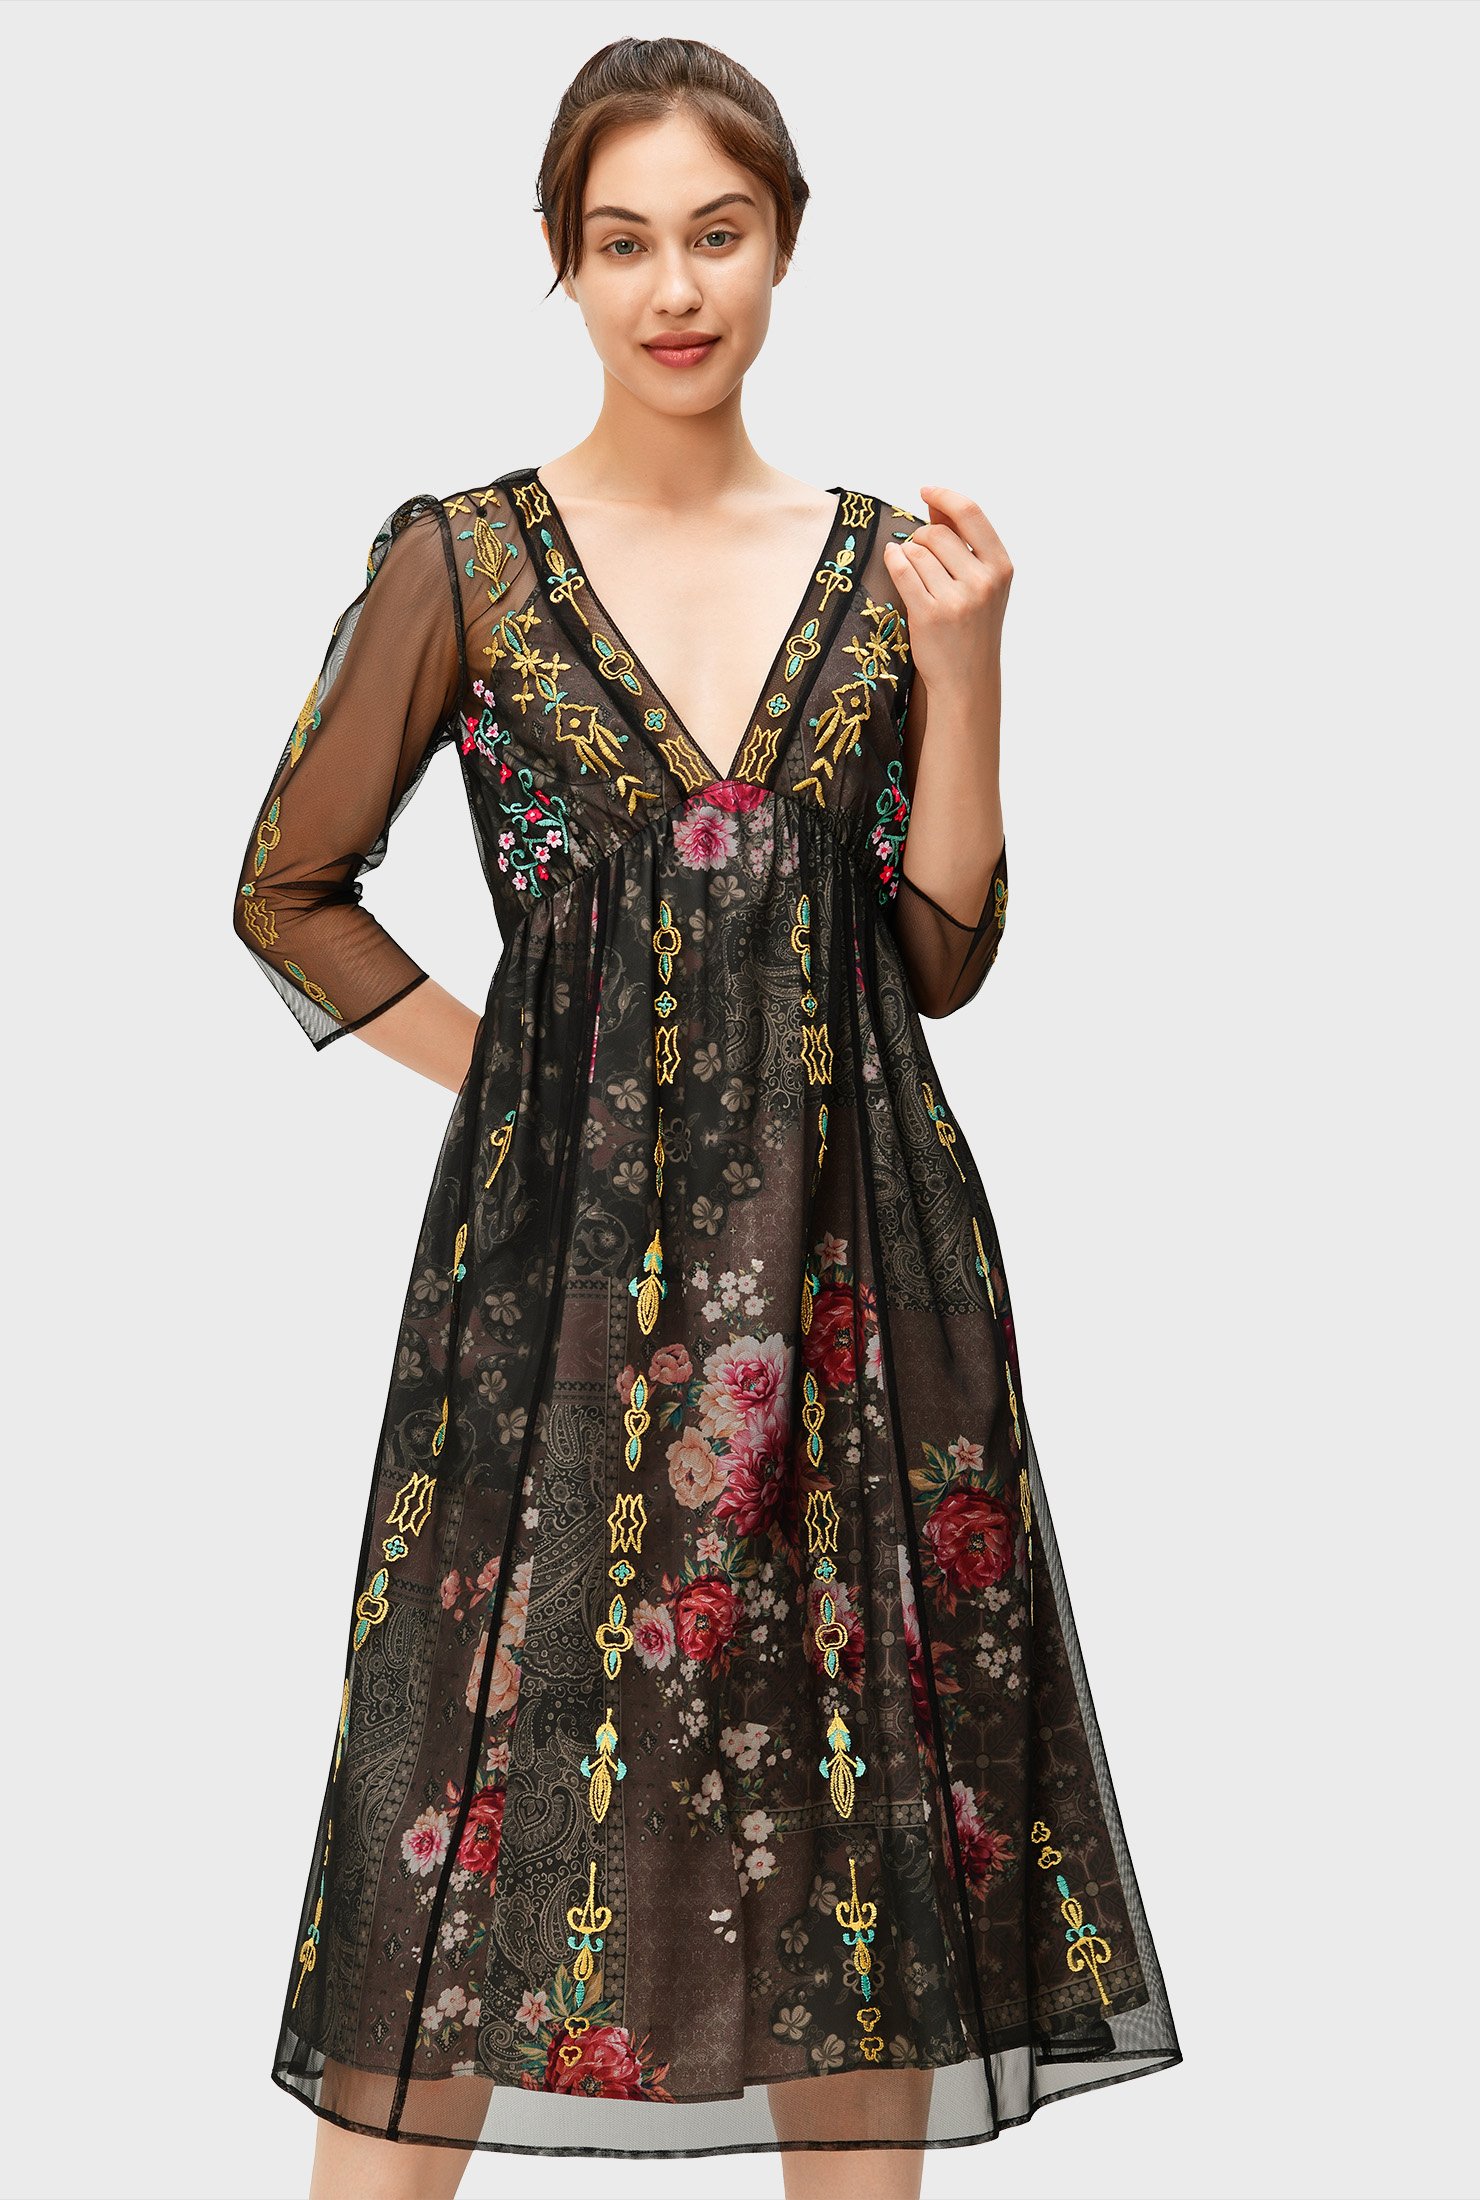 Graphic embroidery tulle overlay floral print crepe empire dress